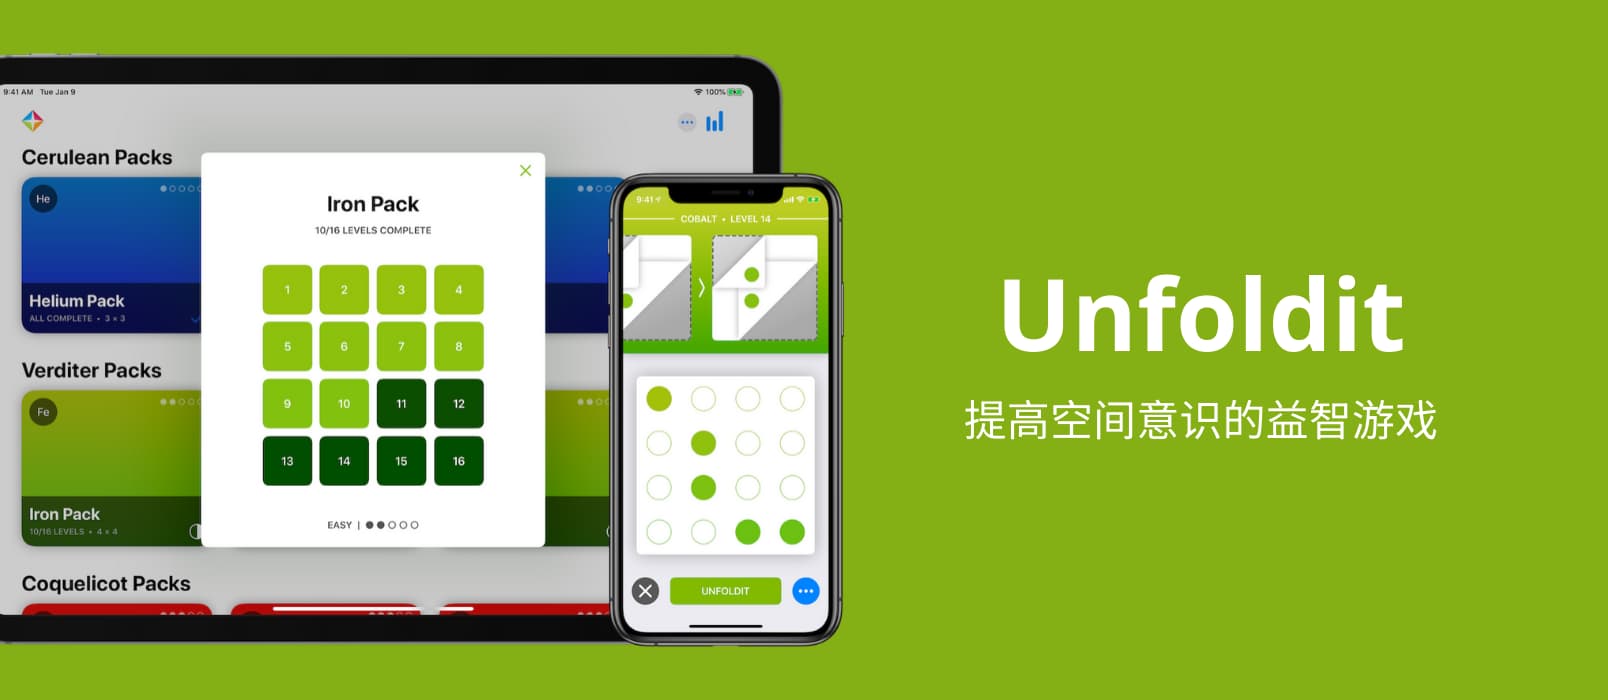 Unfoldit - 用来提高你的空间意识的益智游戏[iPhone/Android] 1